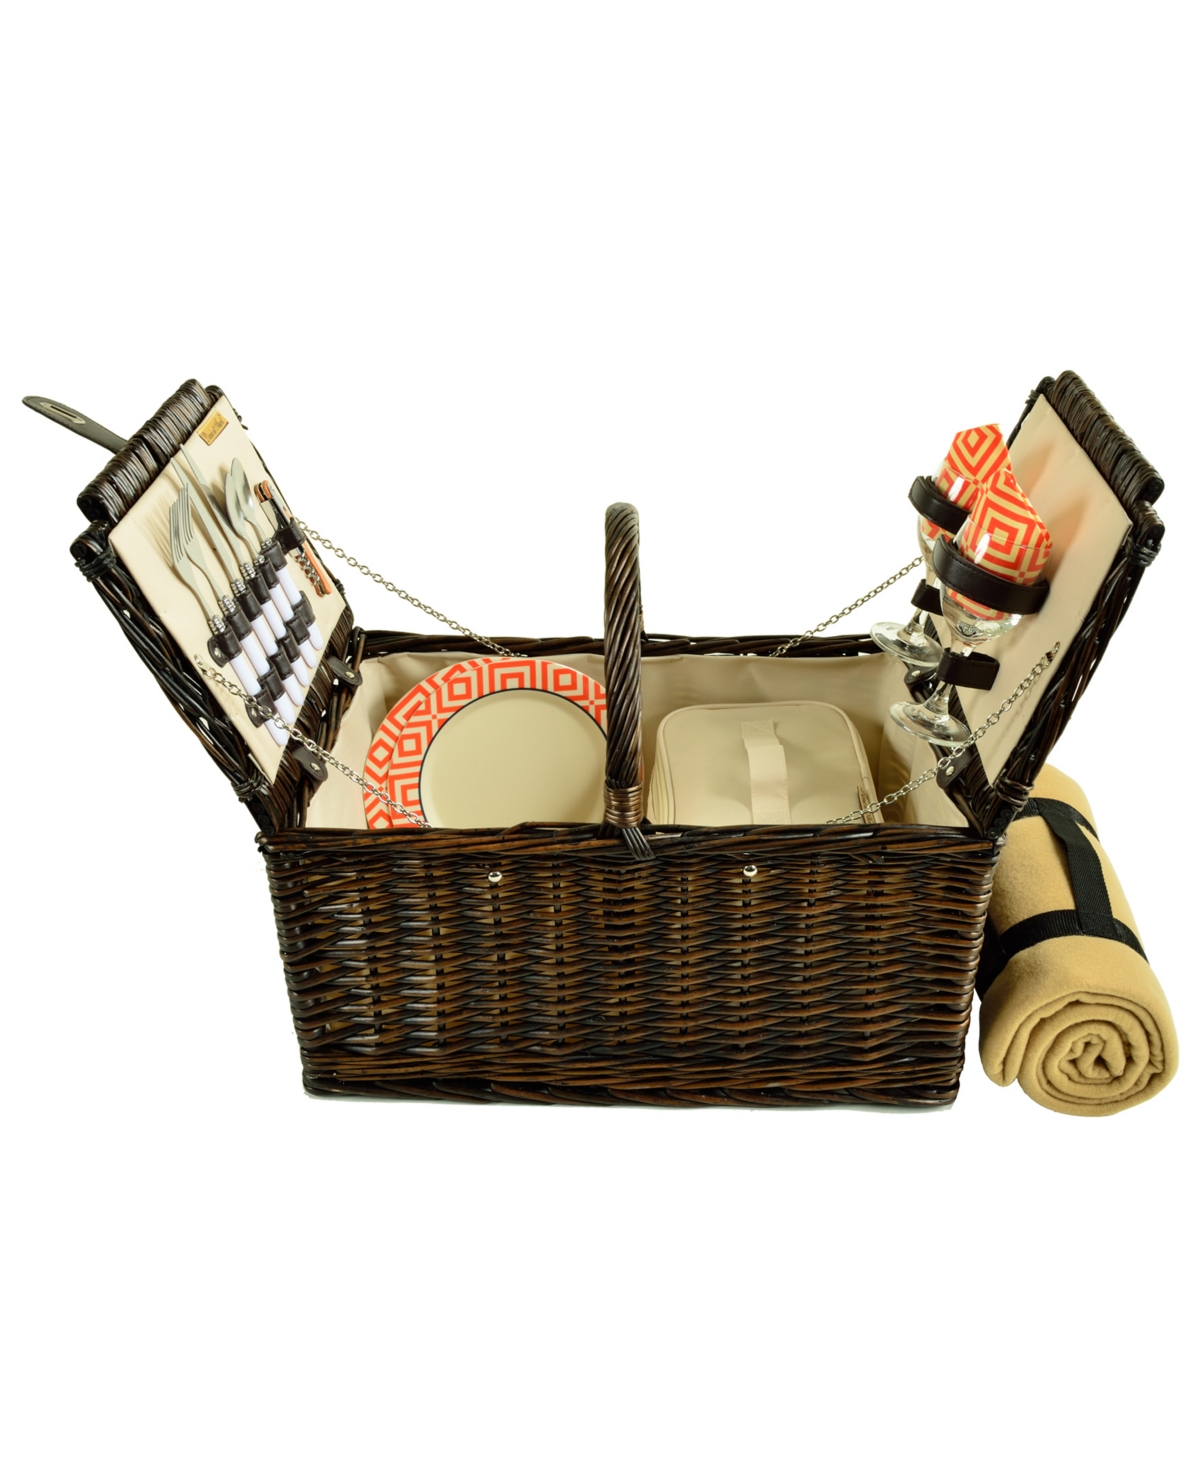 Surrey Willow Picnic Basket with Blanket - Service for 2 - Orange